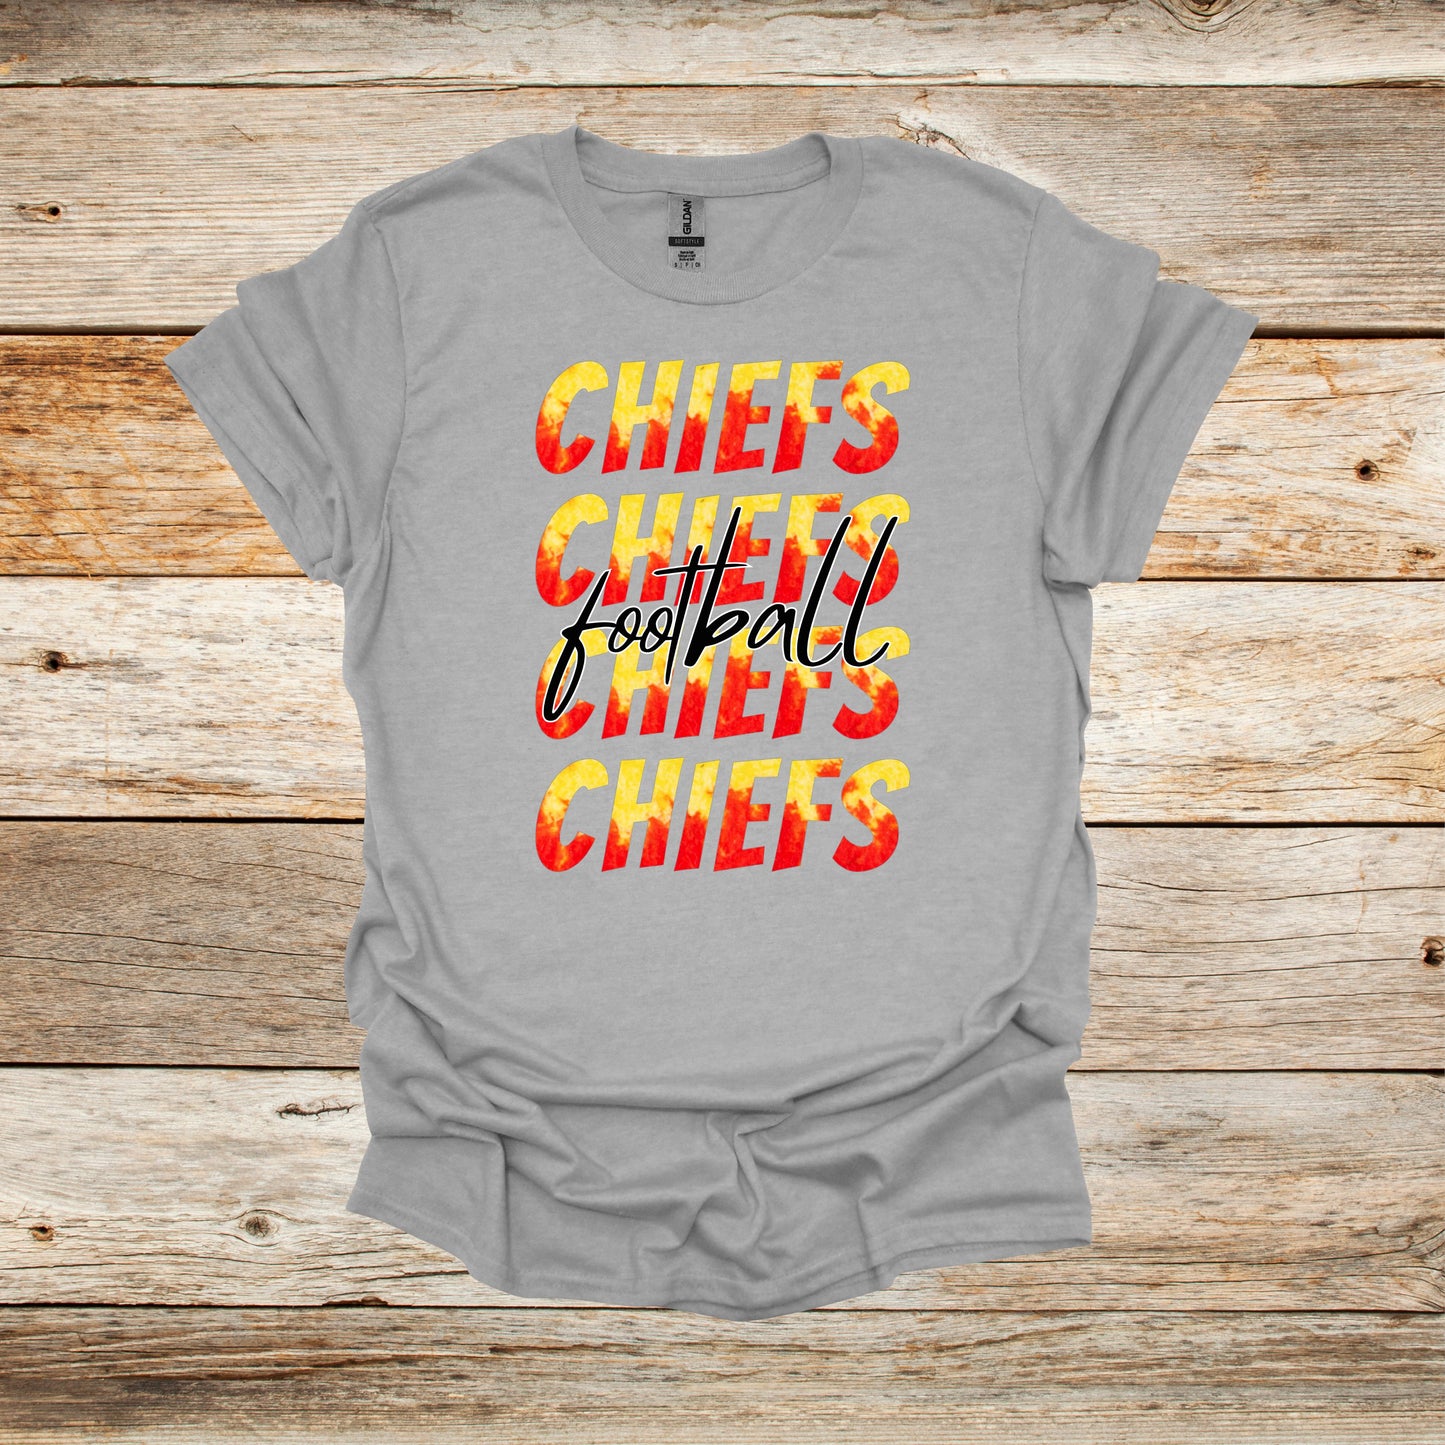 Football T-Shirt - Kansas City Chiefs - Chiefs Football - Adult and Children's Tee Shirts - Sports T-Shirts Graphic Avenue Sport Grey Adult Small 